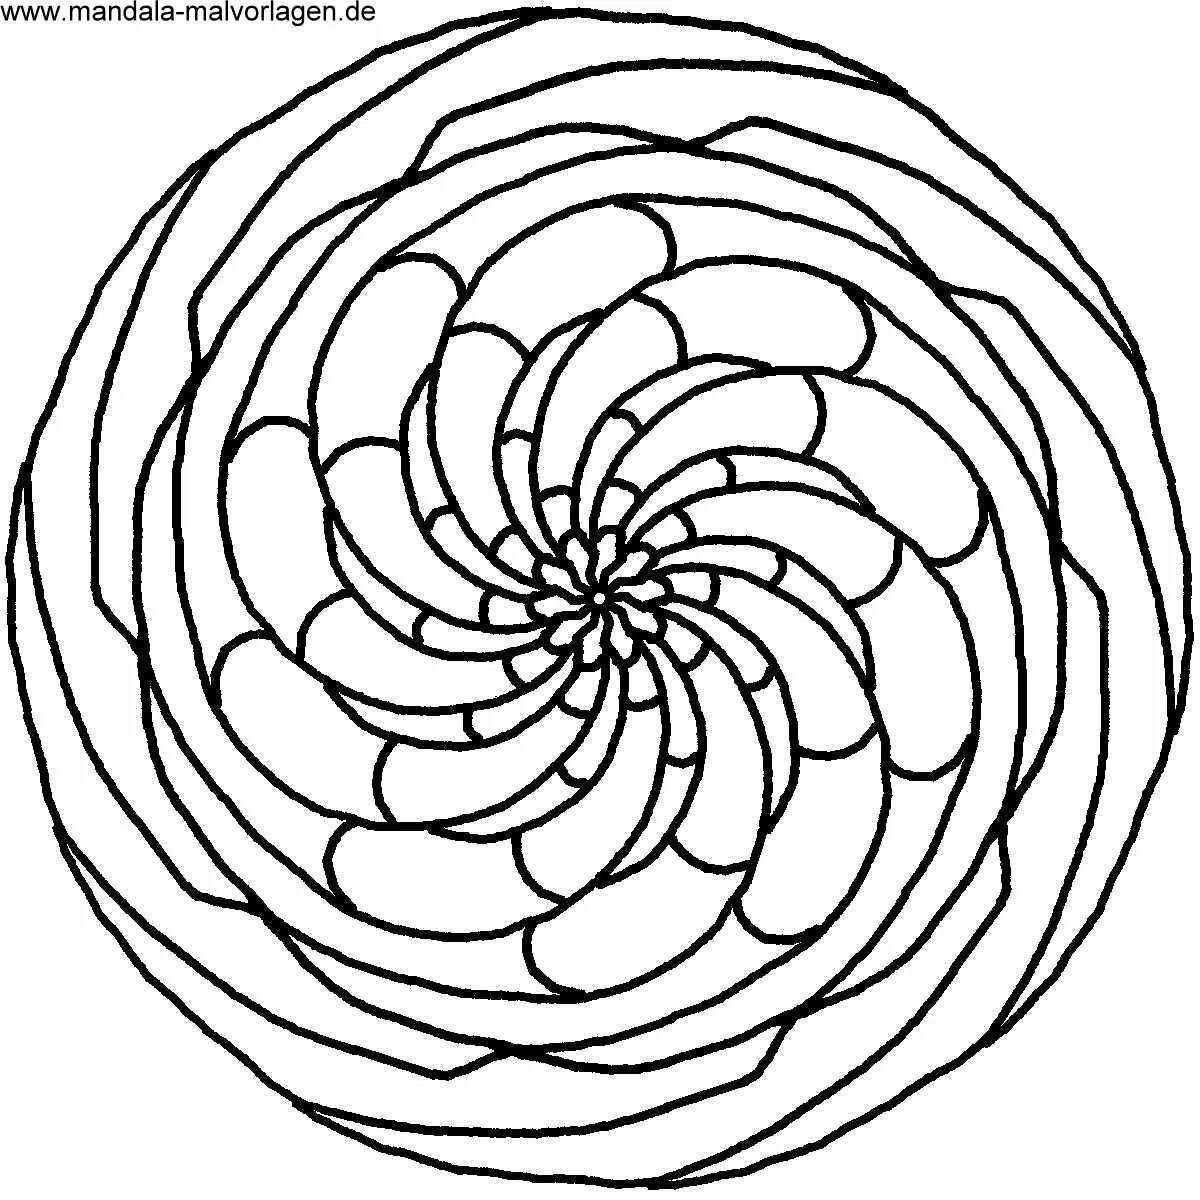 Outstanding program spiral coloring page